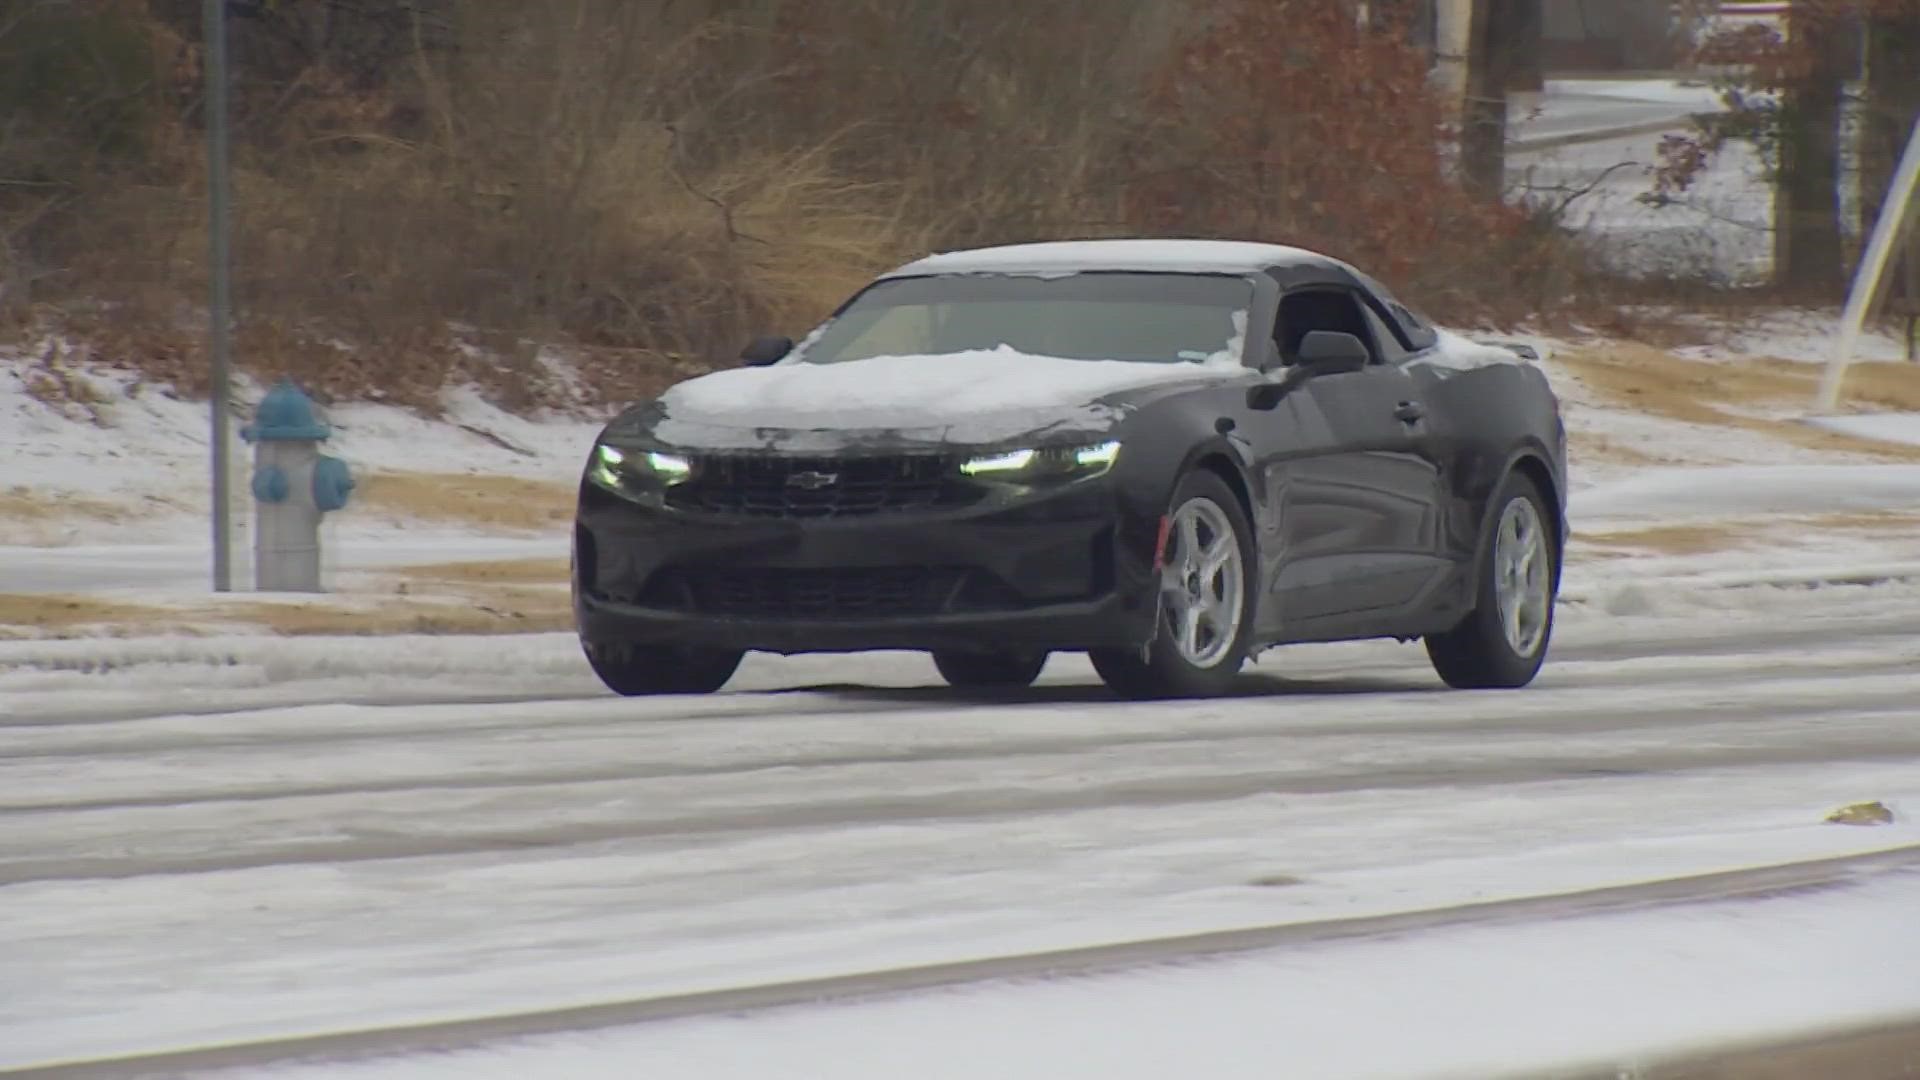 The winter storm brought dangerous conditions to roads in Denton County.